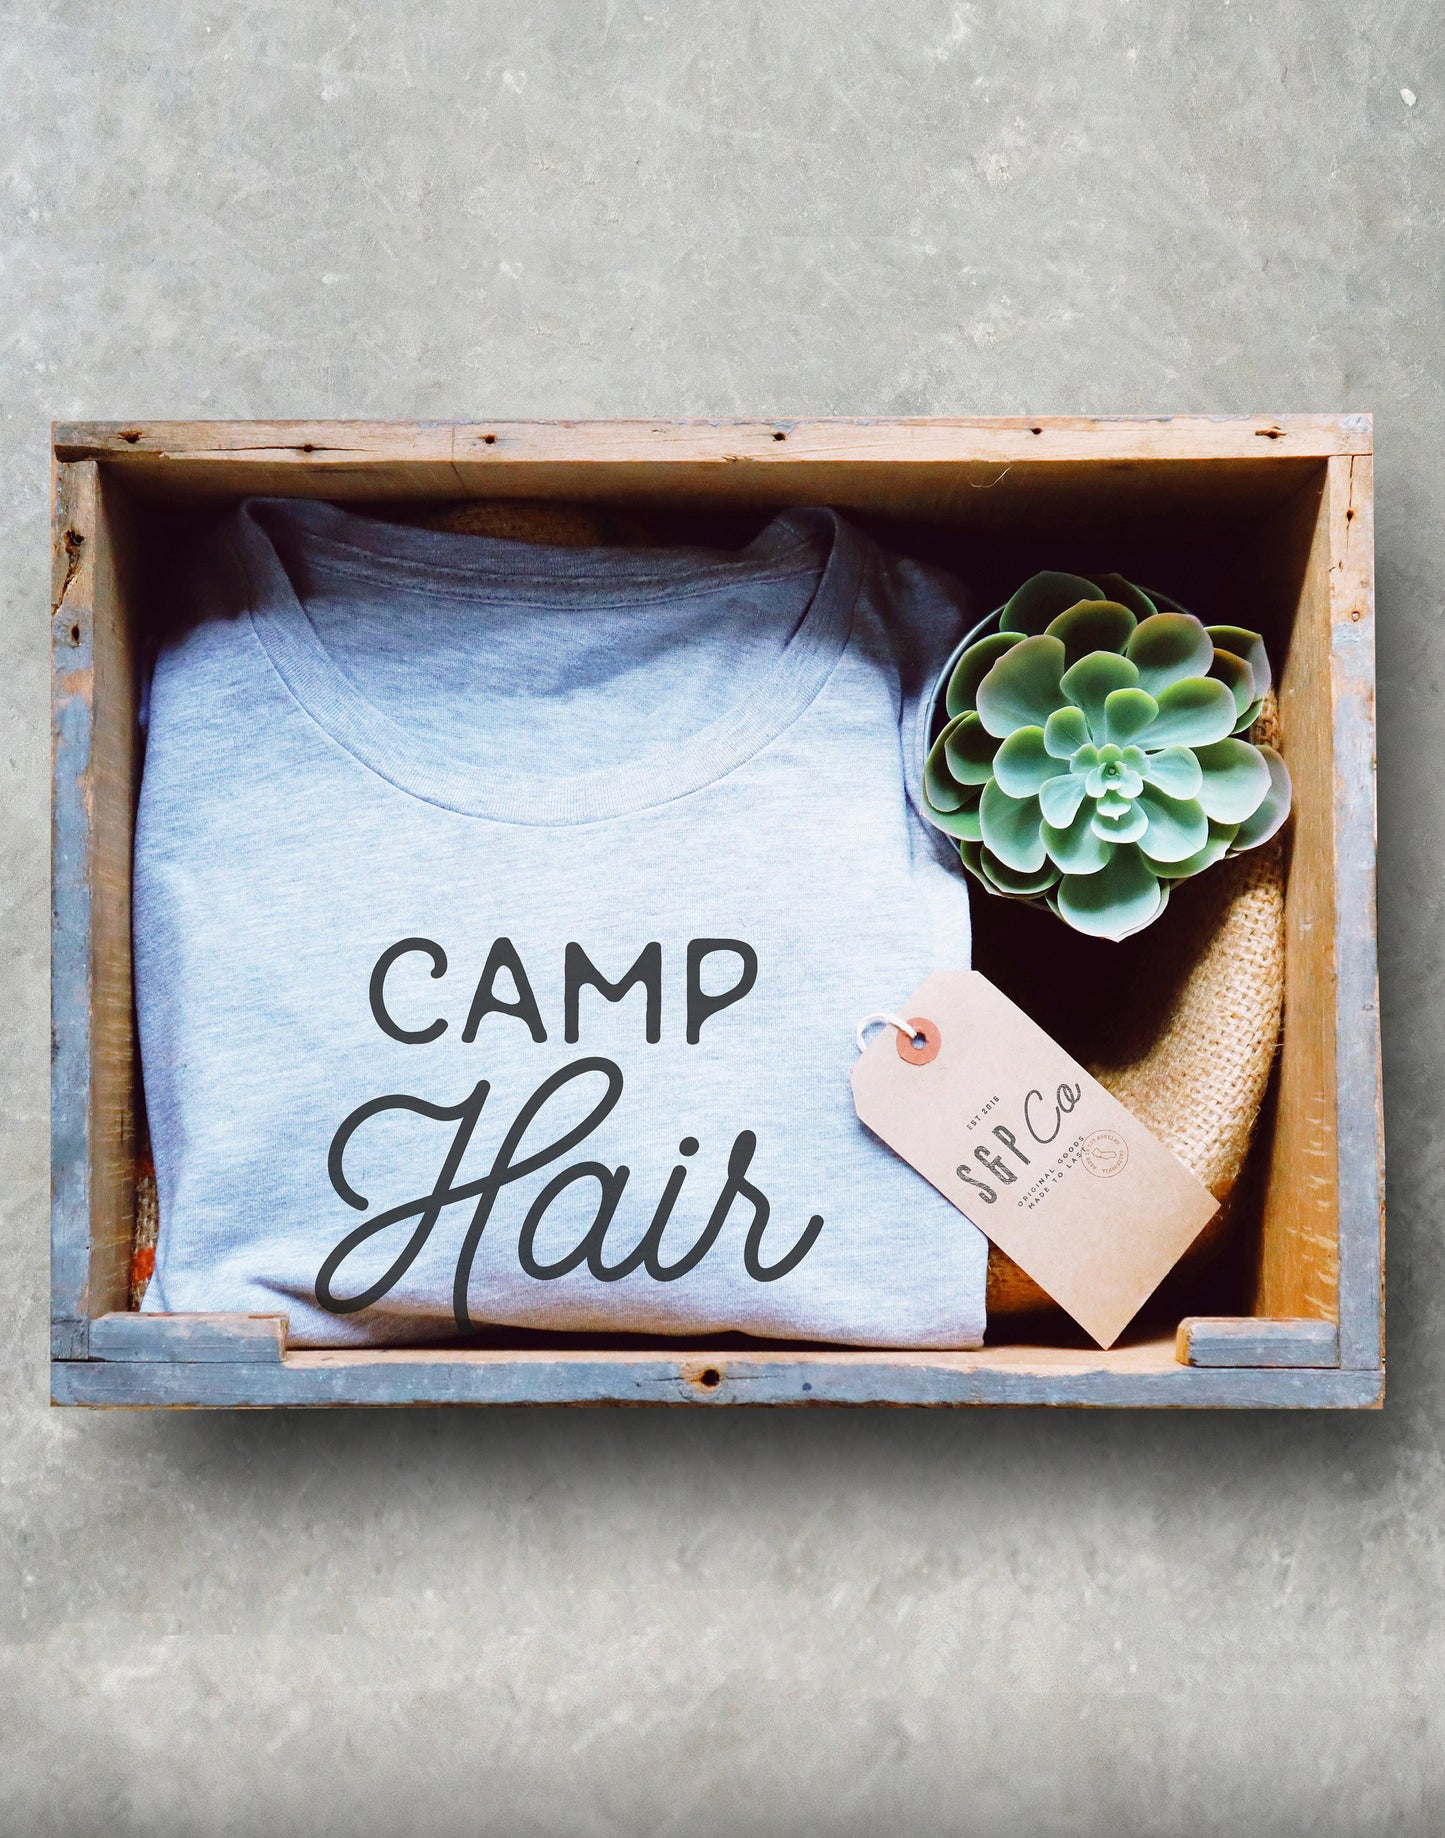 Camp Hair Don't Care Unisex Shirt - Camping shirt, Happy camper shirt, Happy camper, Camping, Hiking shirt, Camping gift, Camp shirt